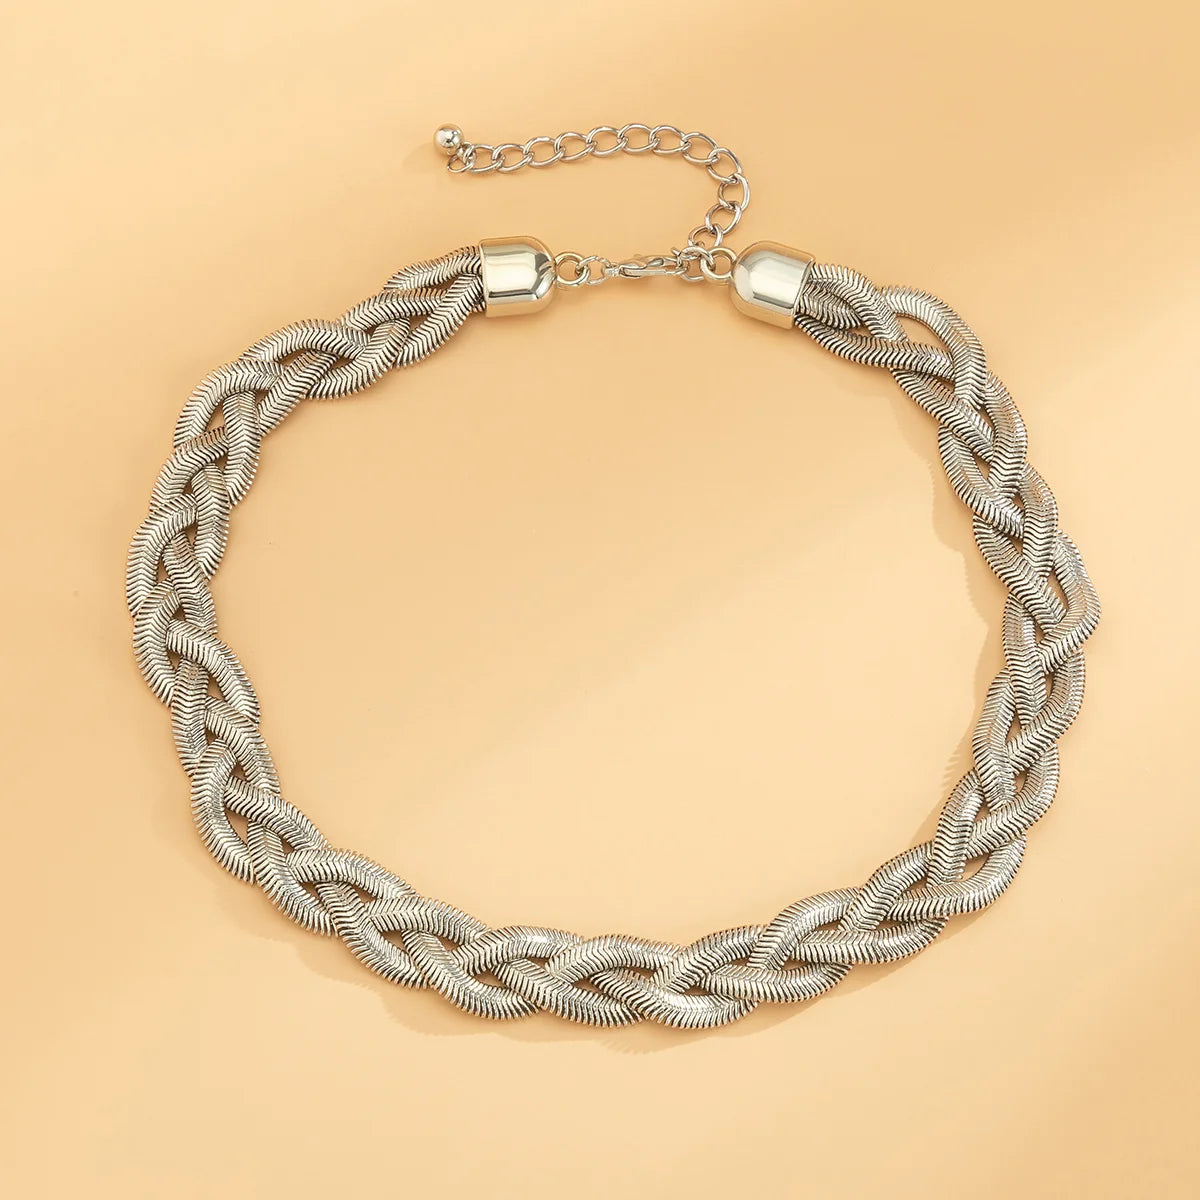 Elegant Frosted Serpent Link Chain Necklace for Women | ULZZANG BELLA